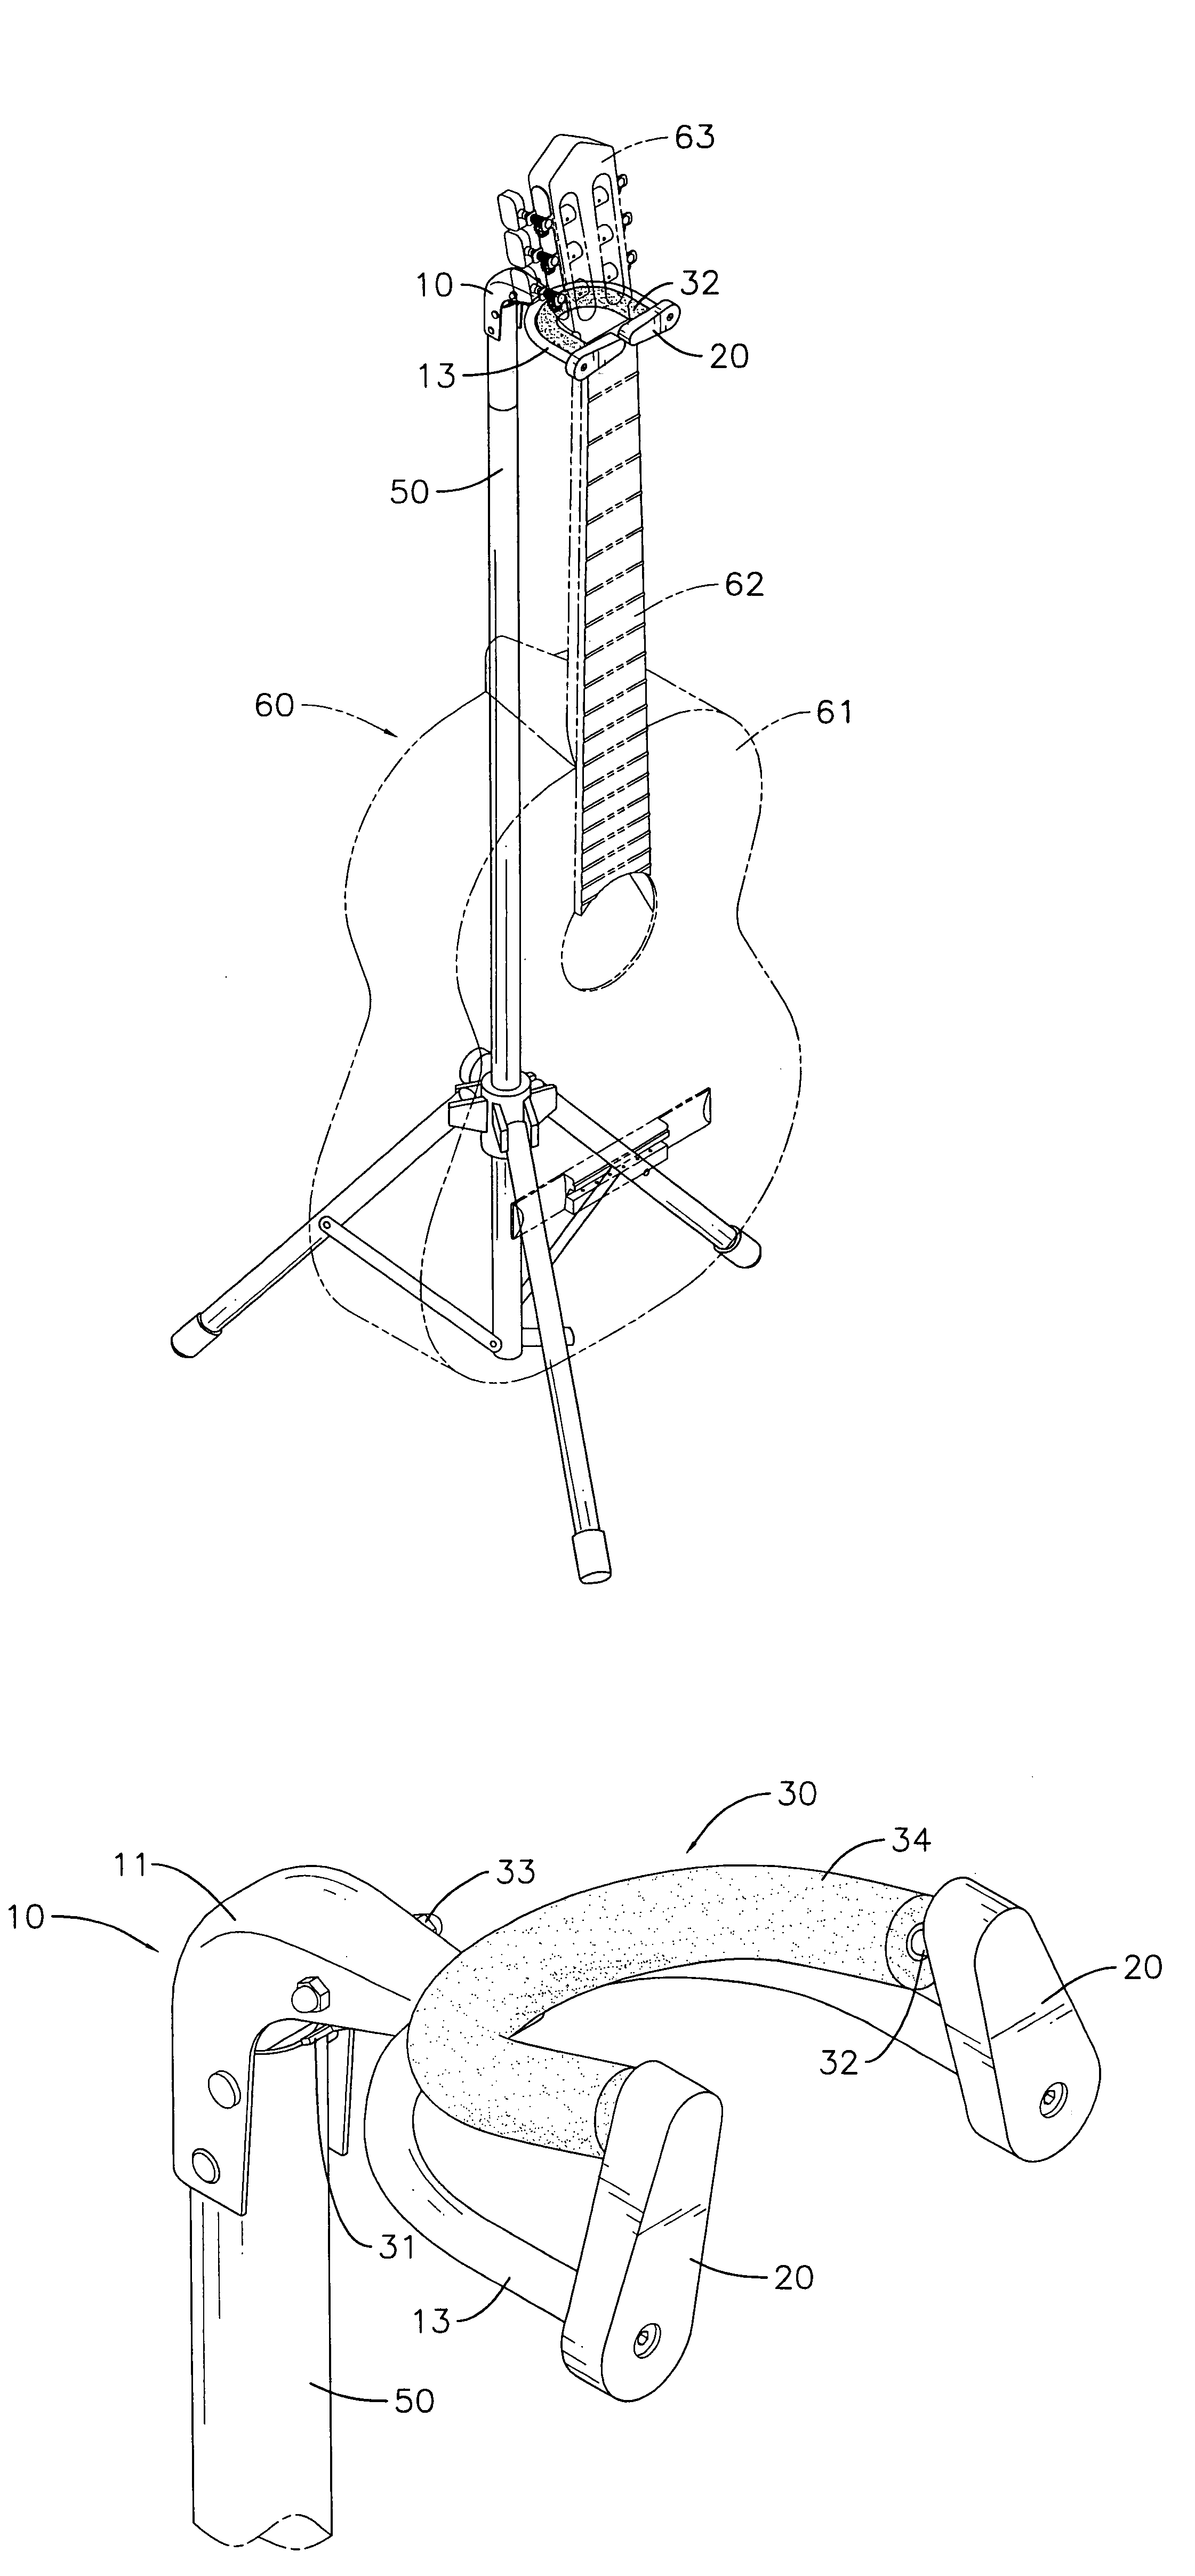 Musical instrument stand with a self-locking neck lock assembly